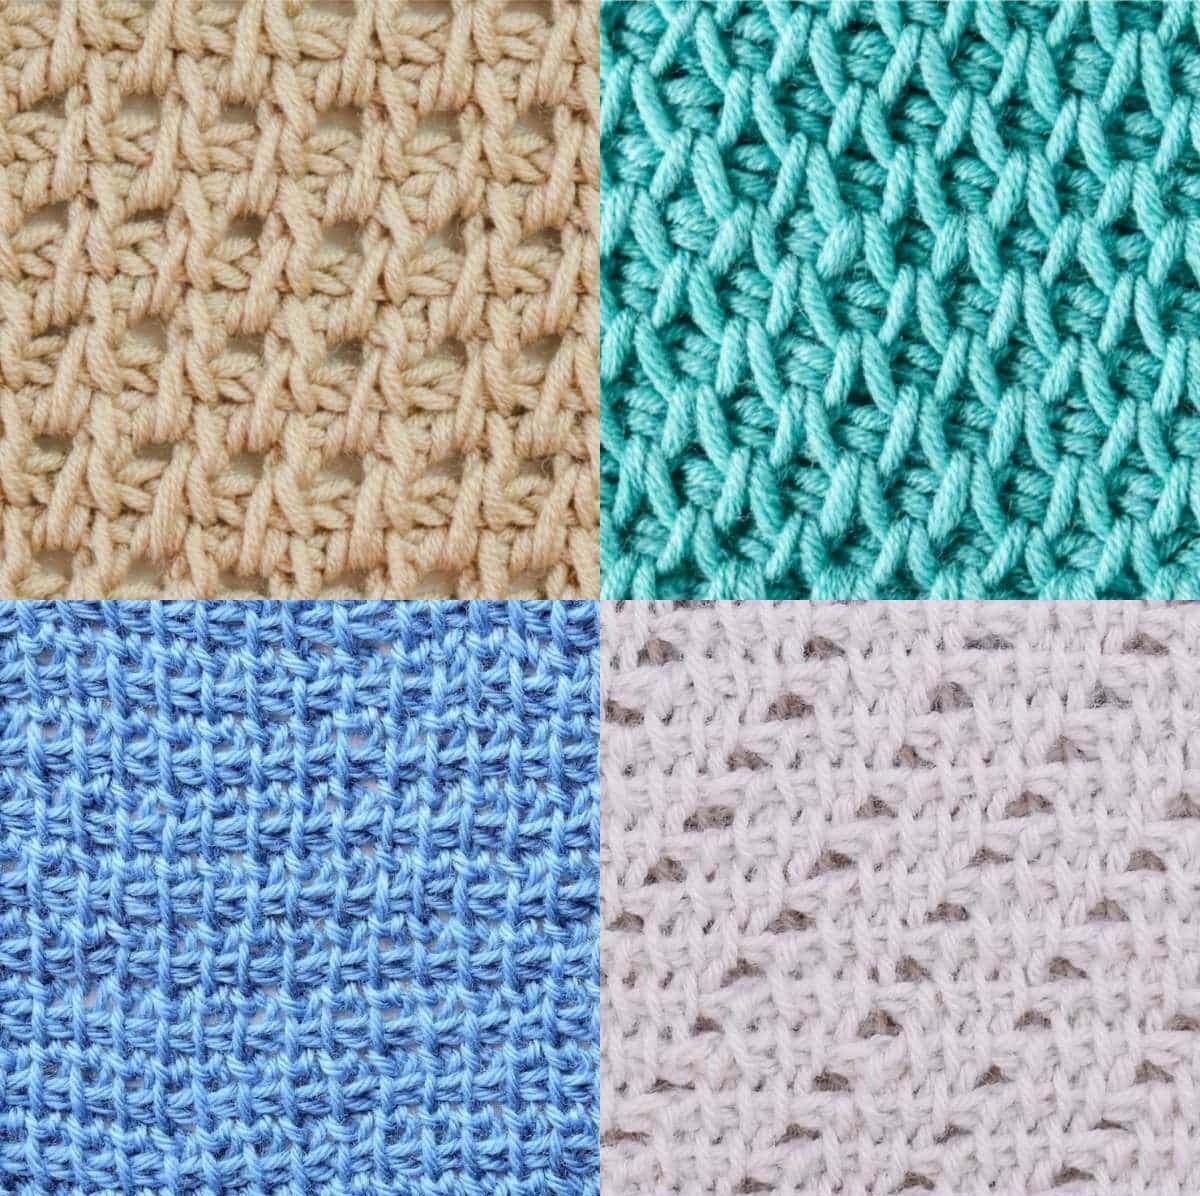 Beginner's Guide to Tunisian Crochet: with 10 modern projects for